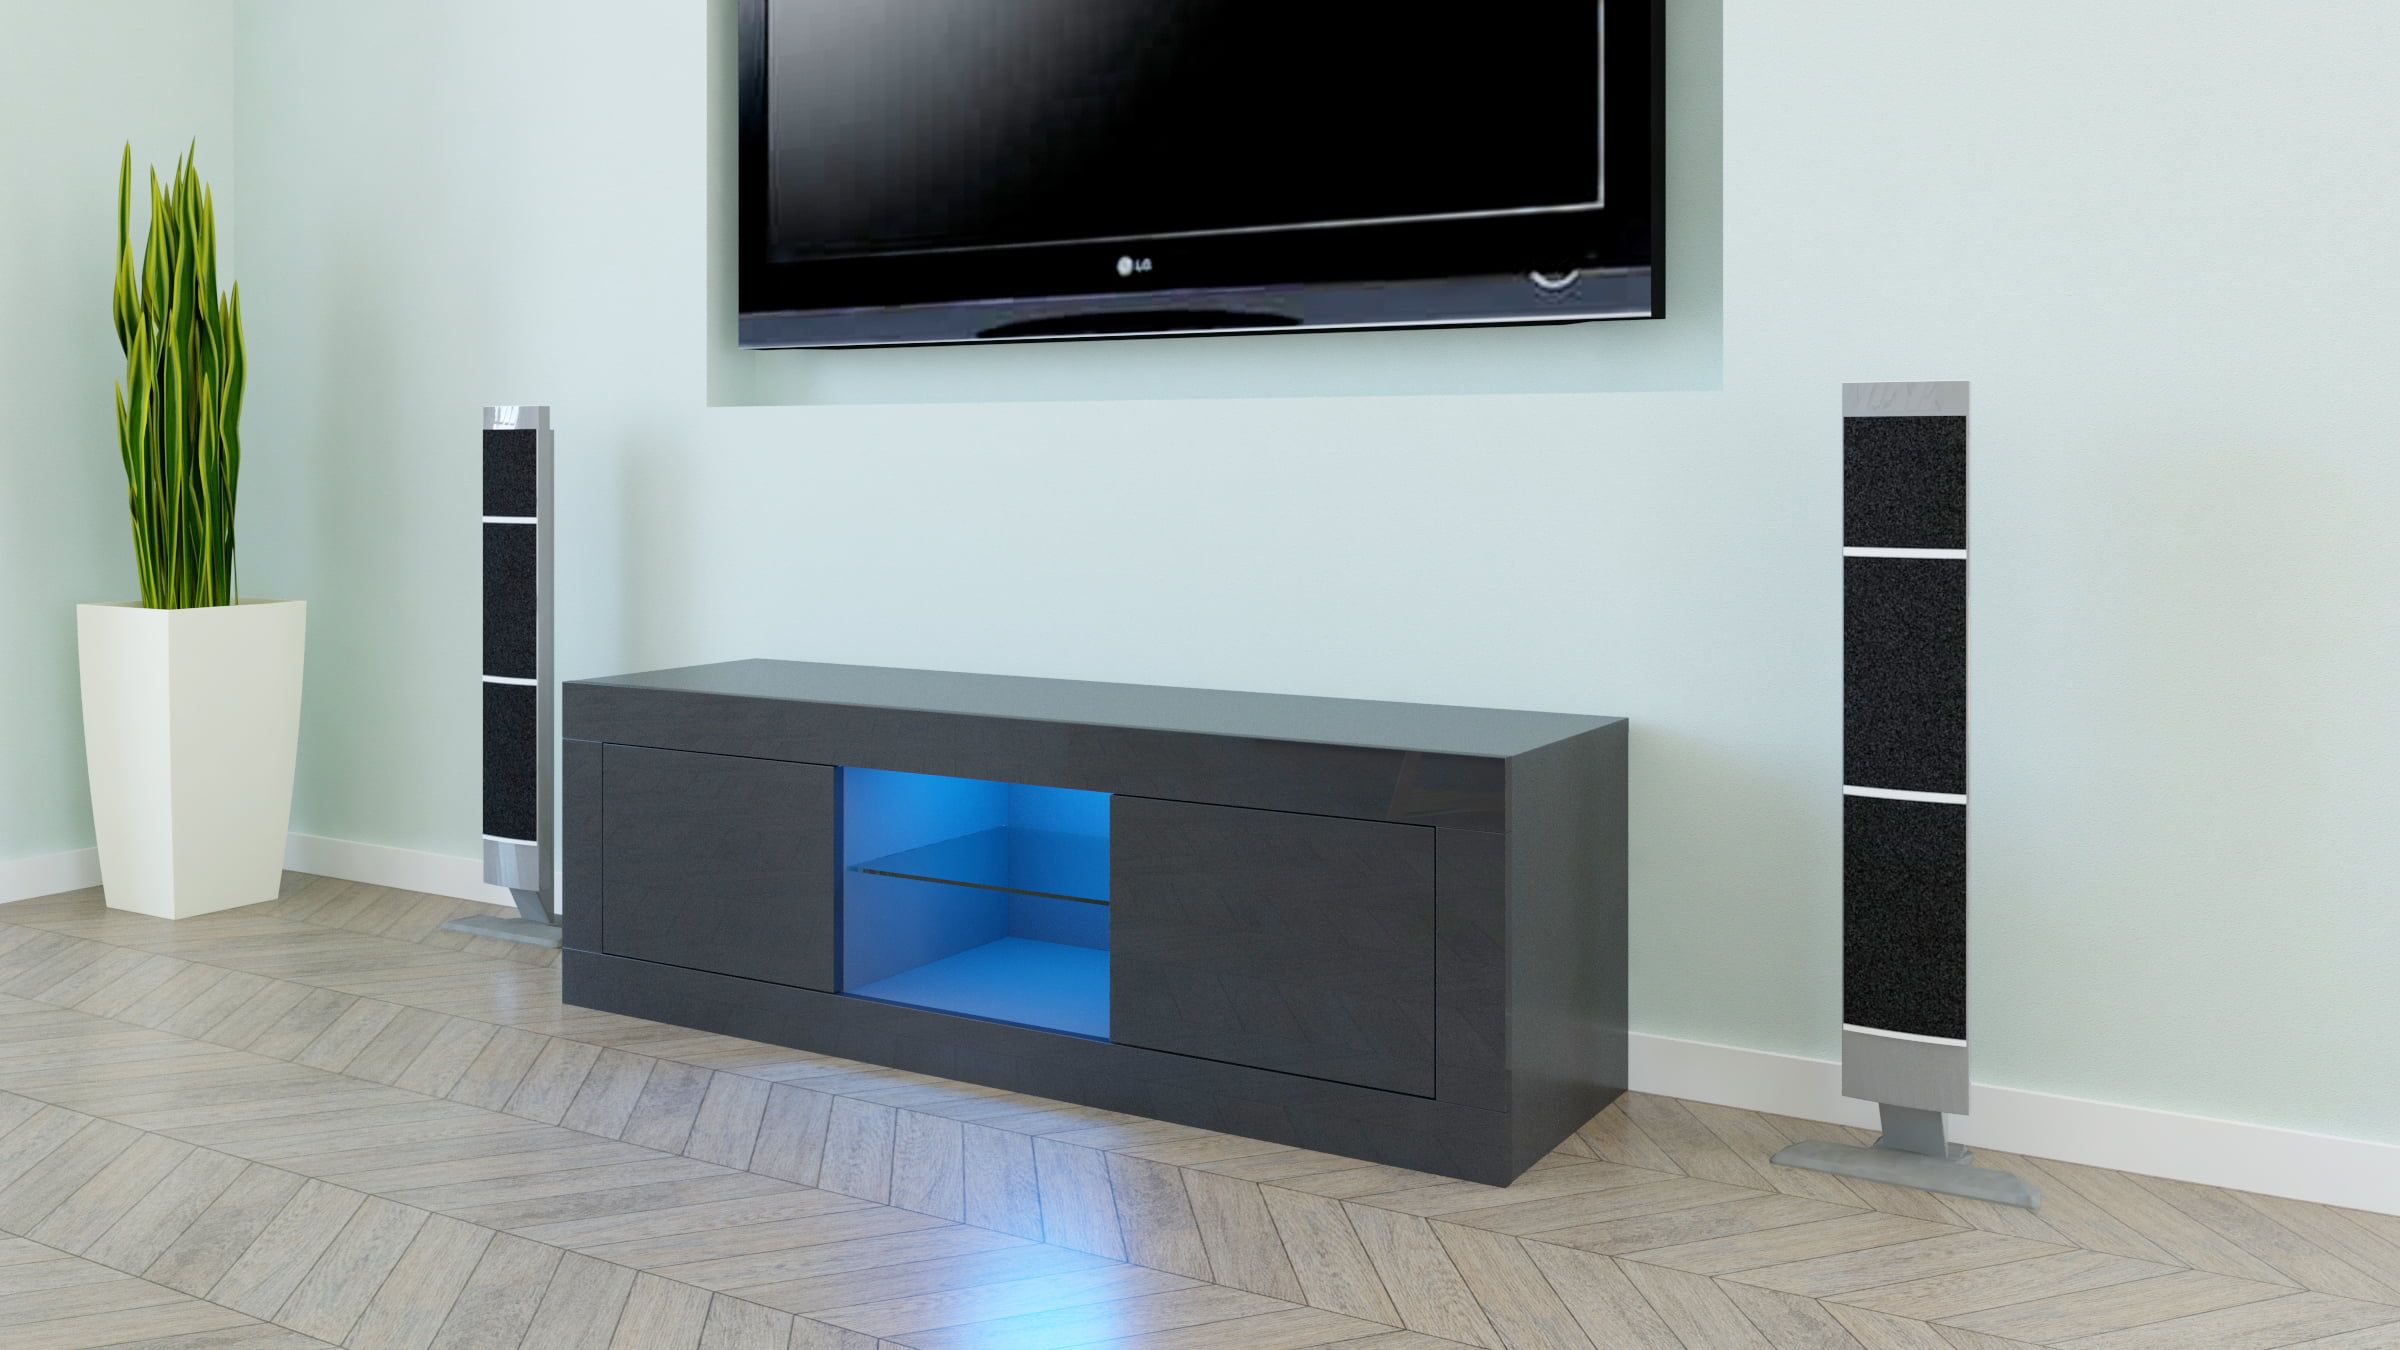 Zimtown Tv Stand Cabinet,modern Black Tv Stand With Led Light,high Within Tv Stands With Led Lights & Power Outlet (View 2 of 20)